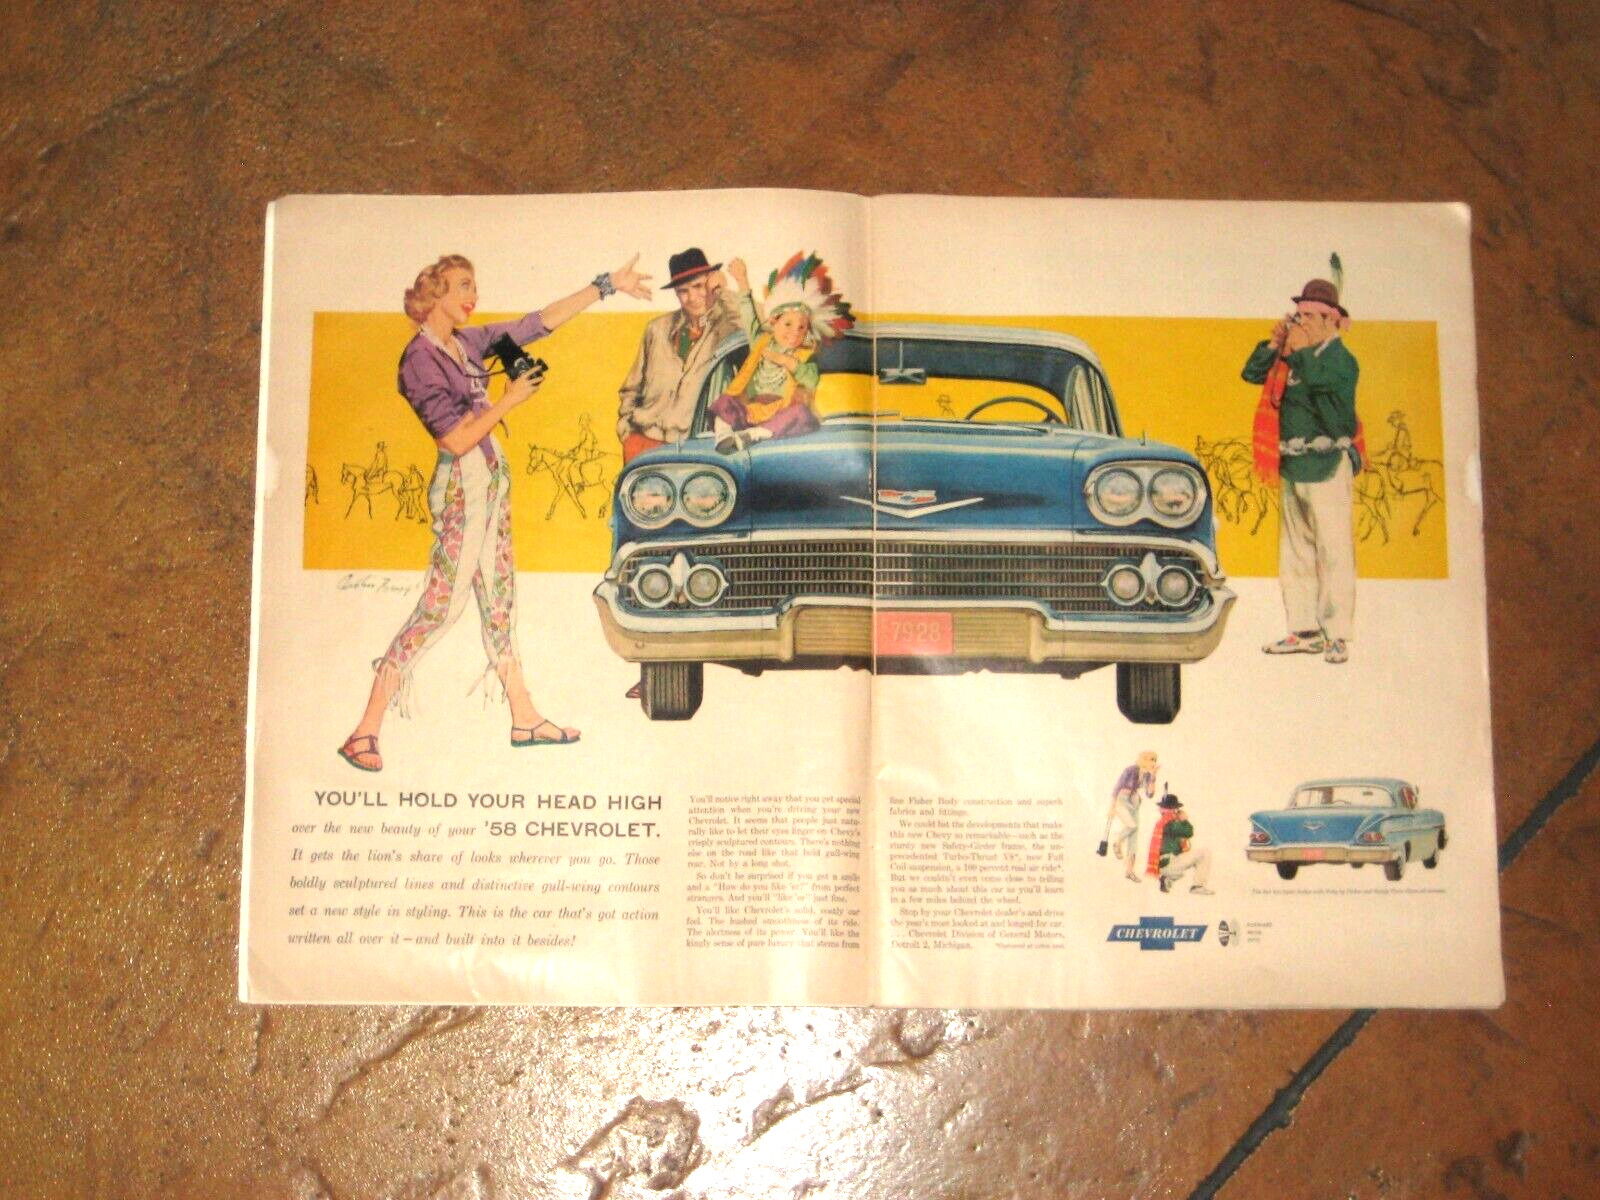 #1331 - VINTAGE 1958 LIFE MAGAZINE AD  -  ALL NEW 1958 CHEVROLET - 2-PAGE SPREAD